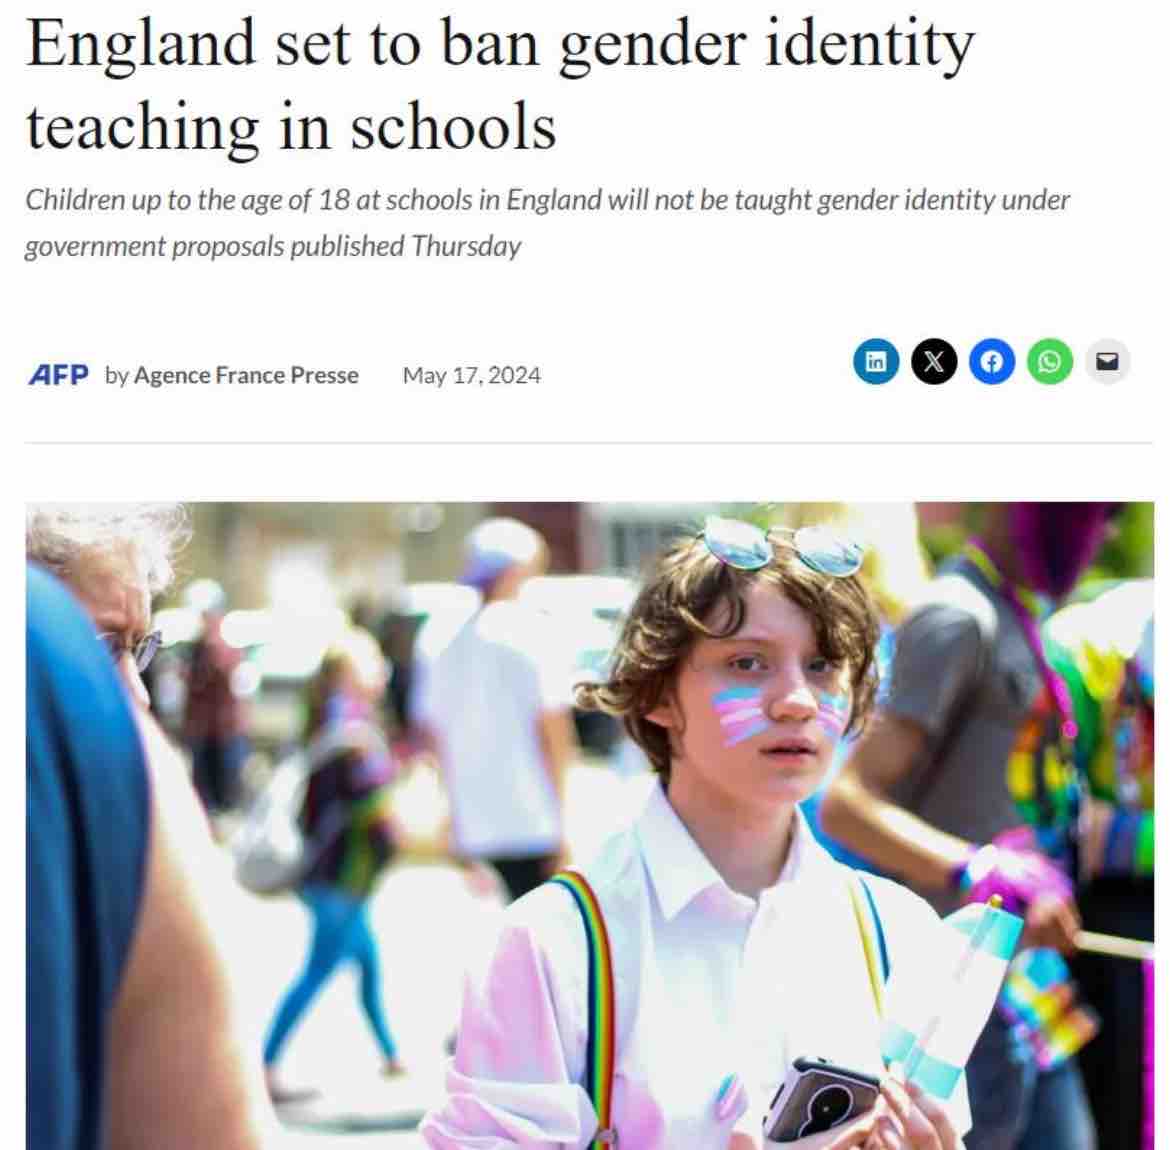 BREAKING: Children at schools in England will no longer be taught gender identity under new government proposals. Countries are beginning to wake up to the harm that this ideology causes children. America should do the same. REPOST if you want to see this in the US! ✋